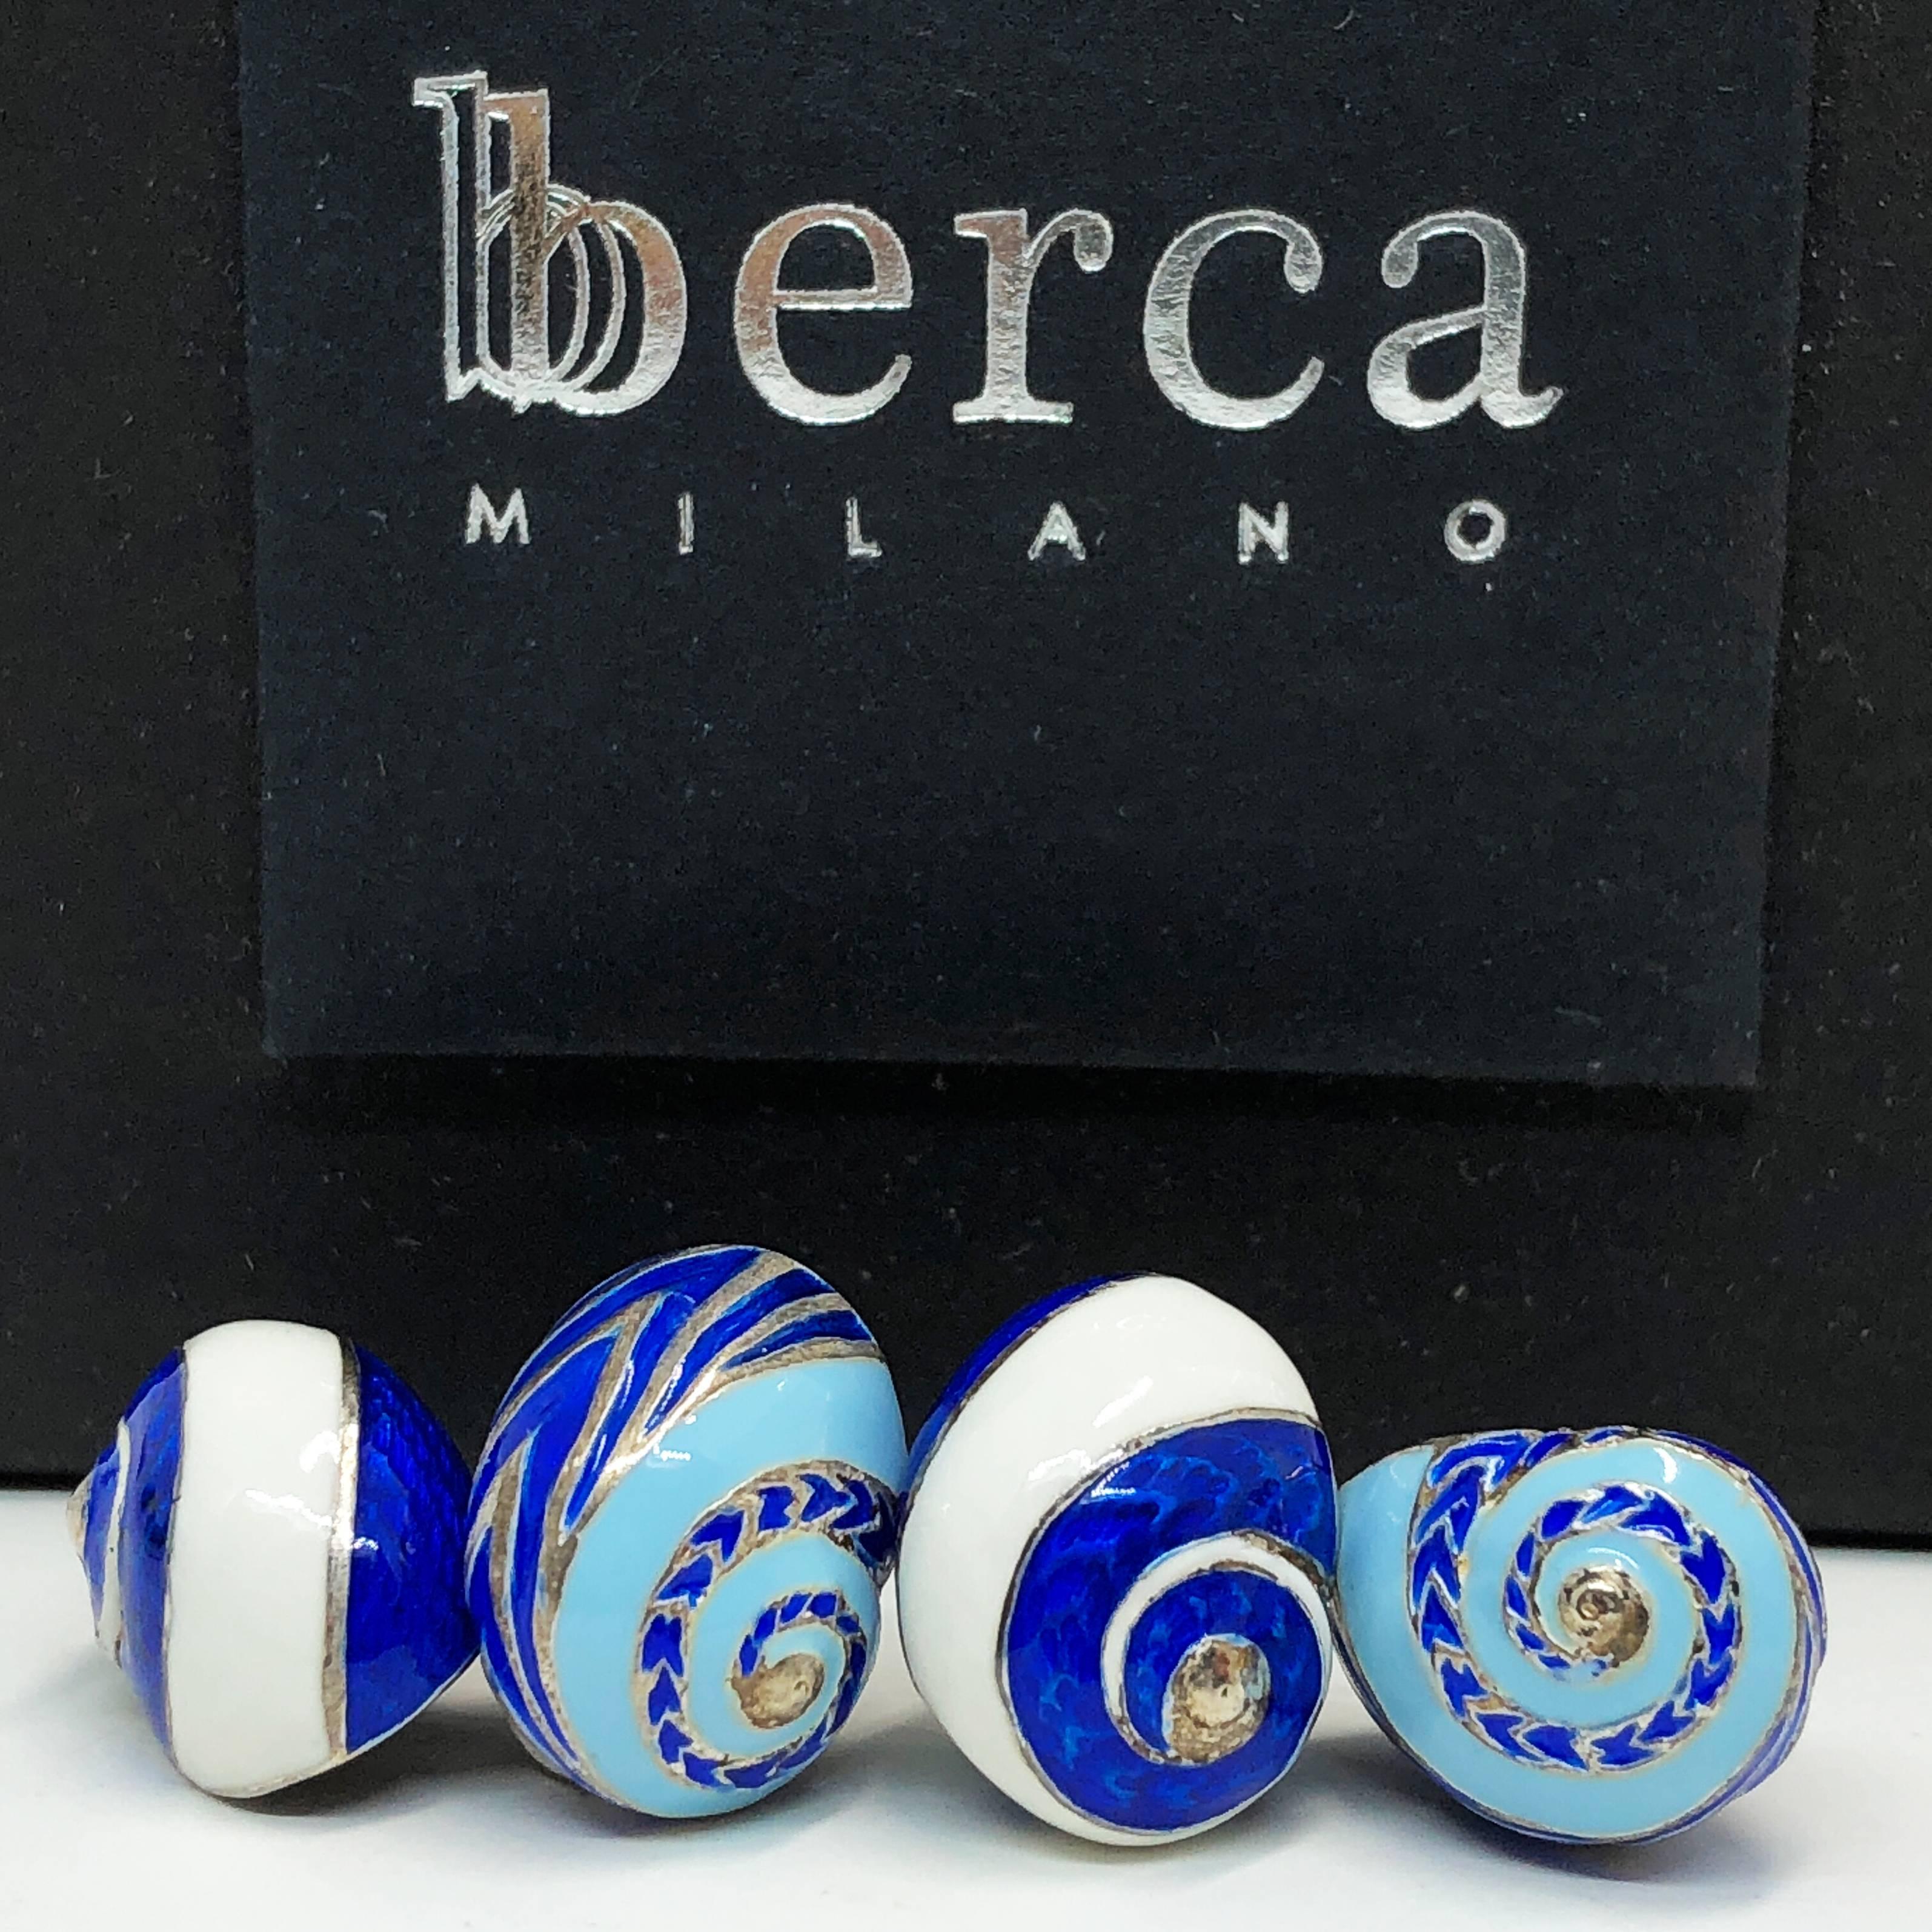 Unique, Chic, White, Blue, Light Blue Hand Enamelled Seashell Shaped Sterling Silver Cufflinks
Shell size about 13x10mm
